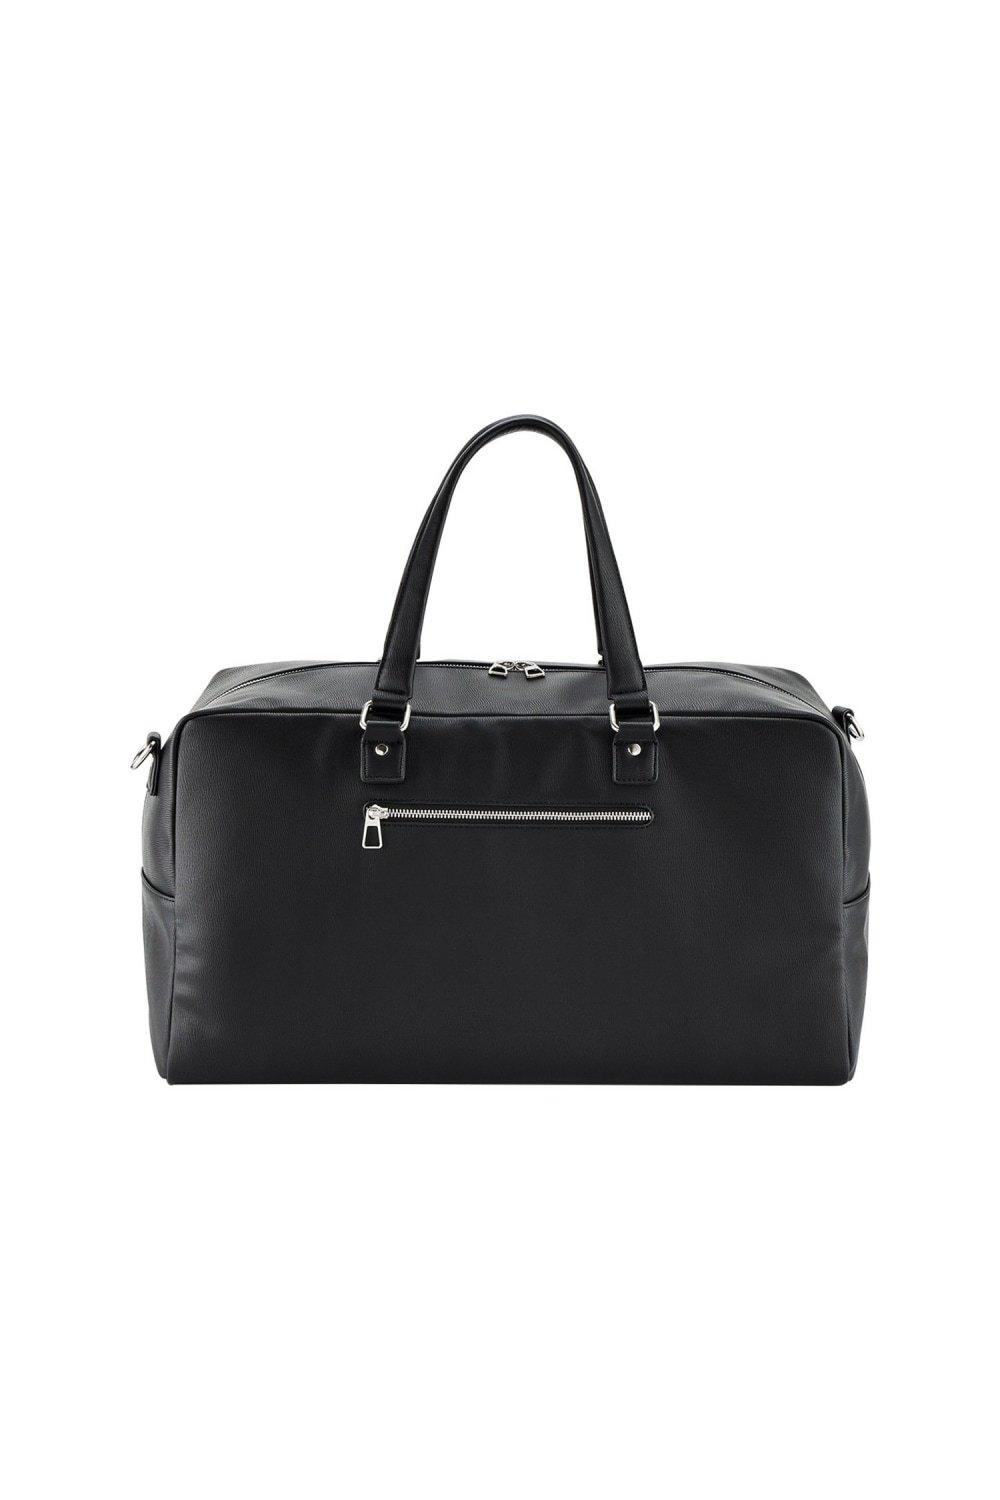 Tailored Luxe Leather-Look PU Weekend Bag